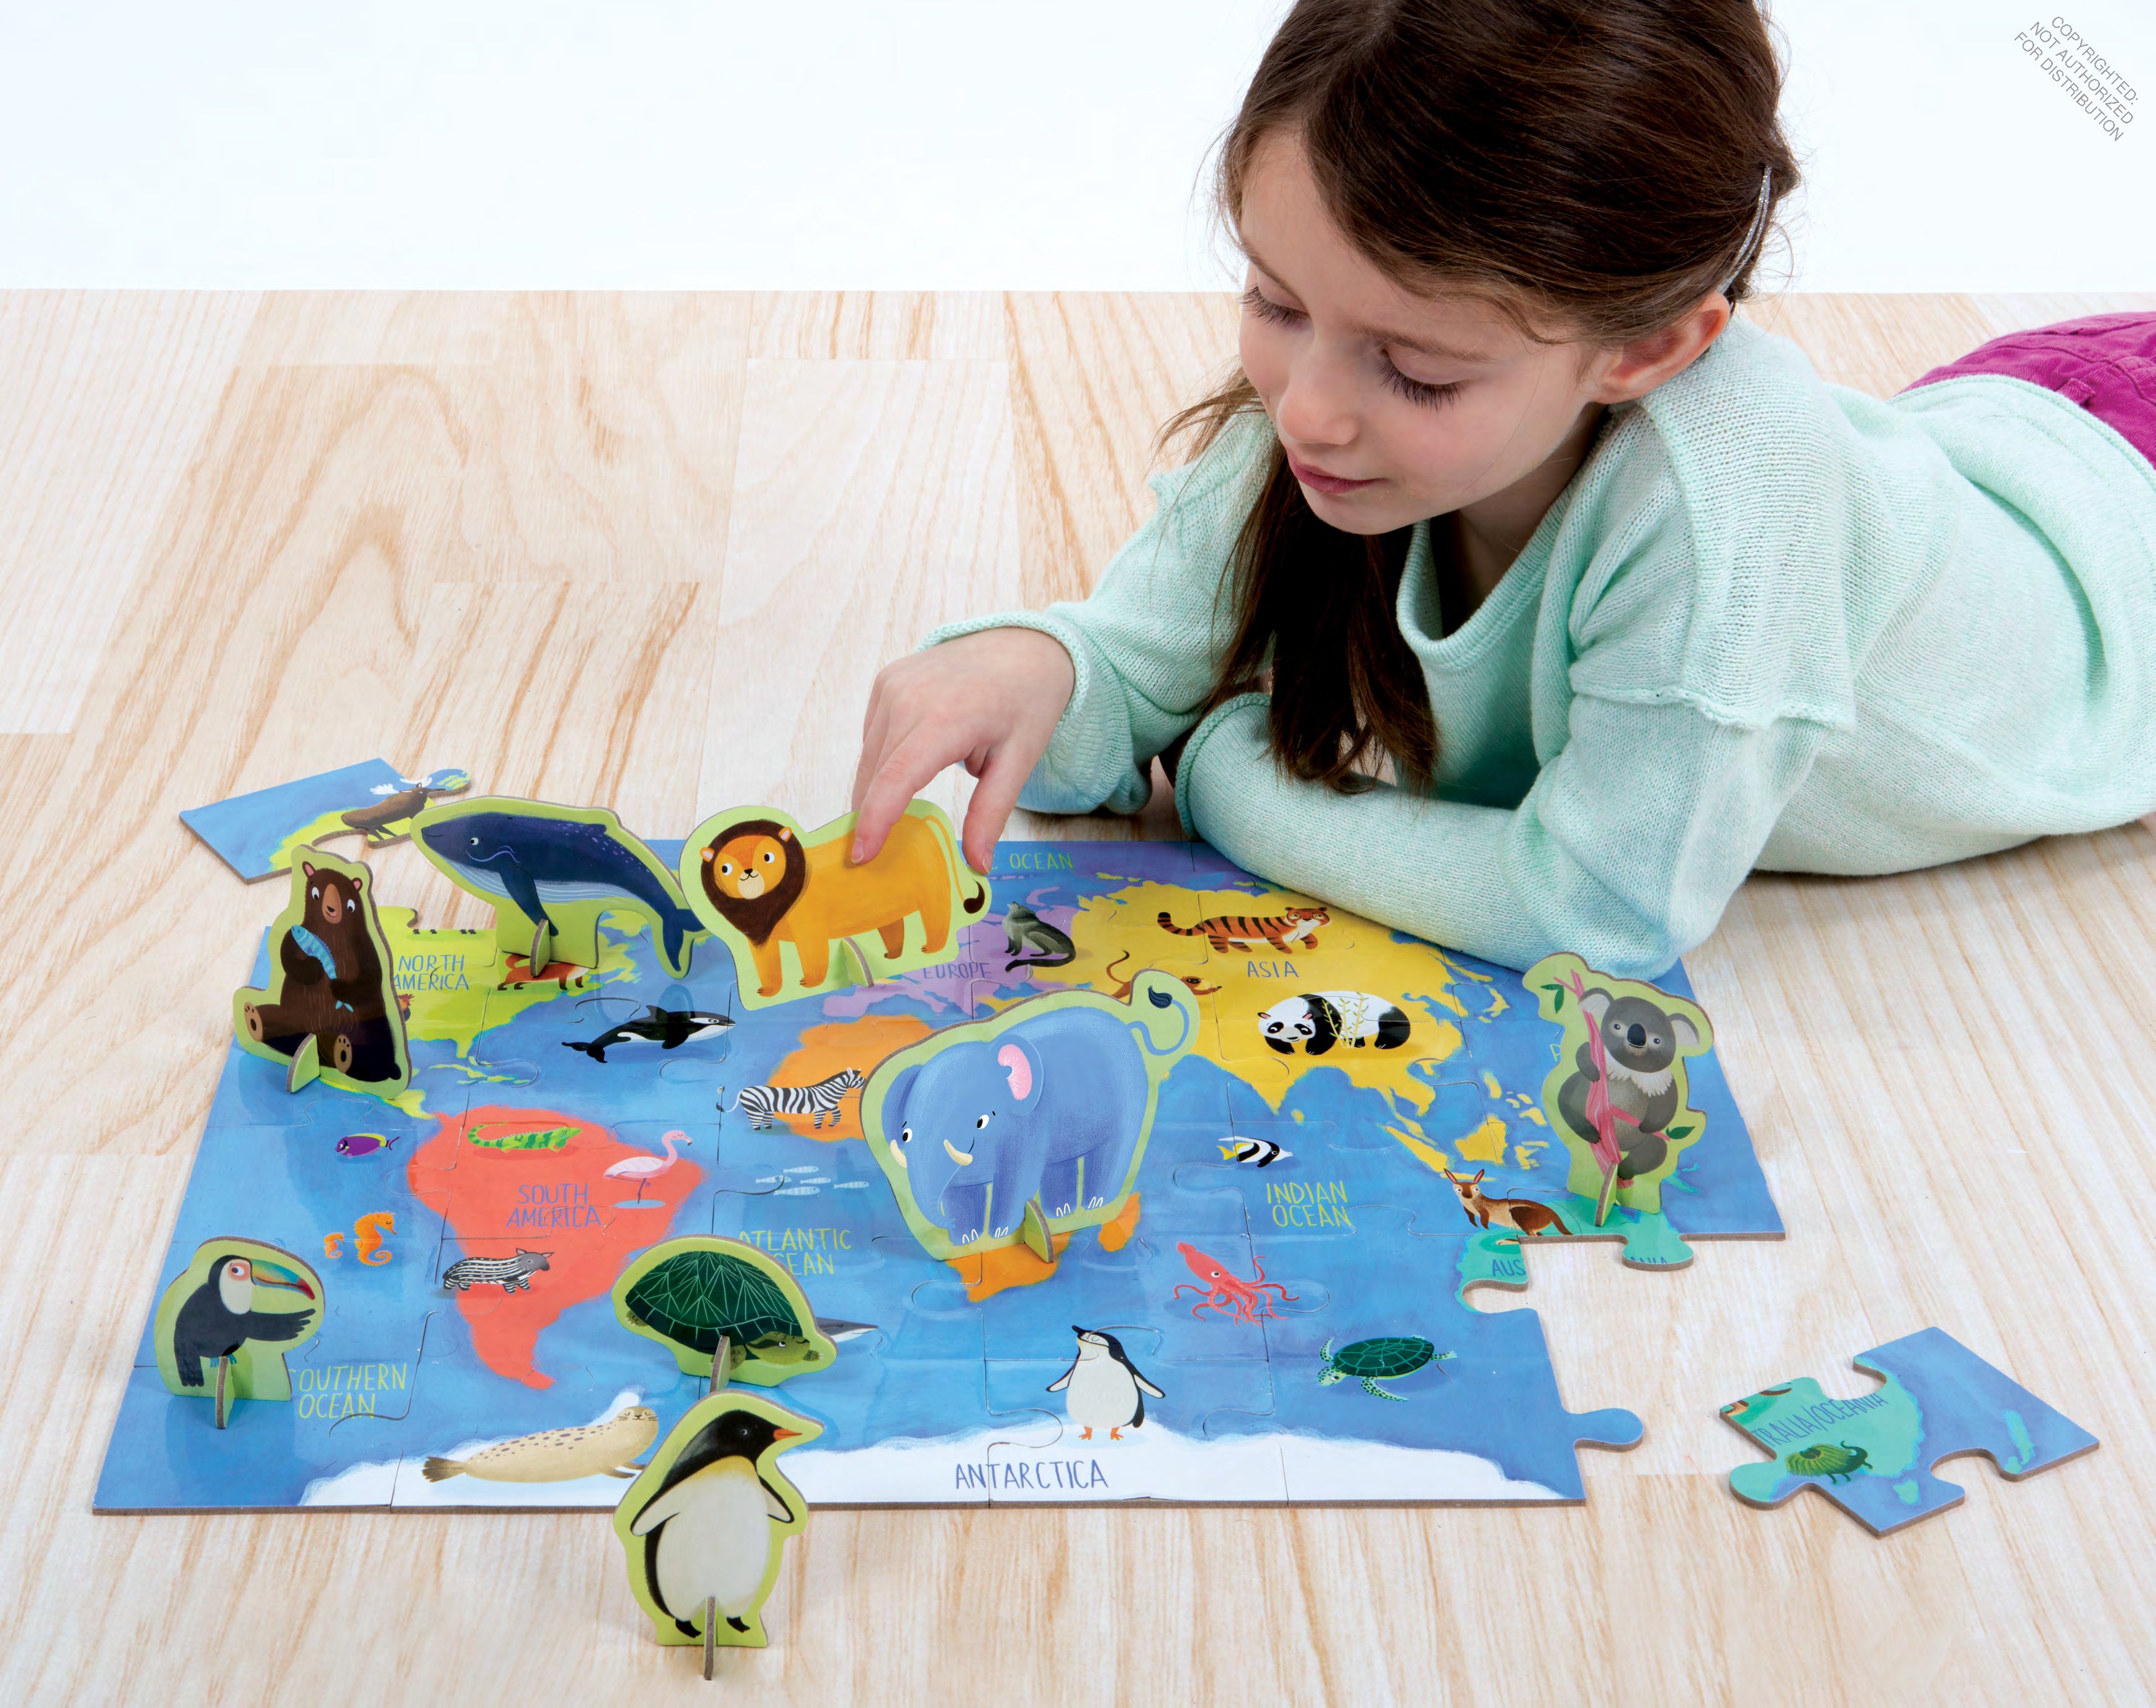 Animals of the World Puzzle Play Set